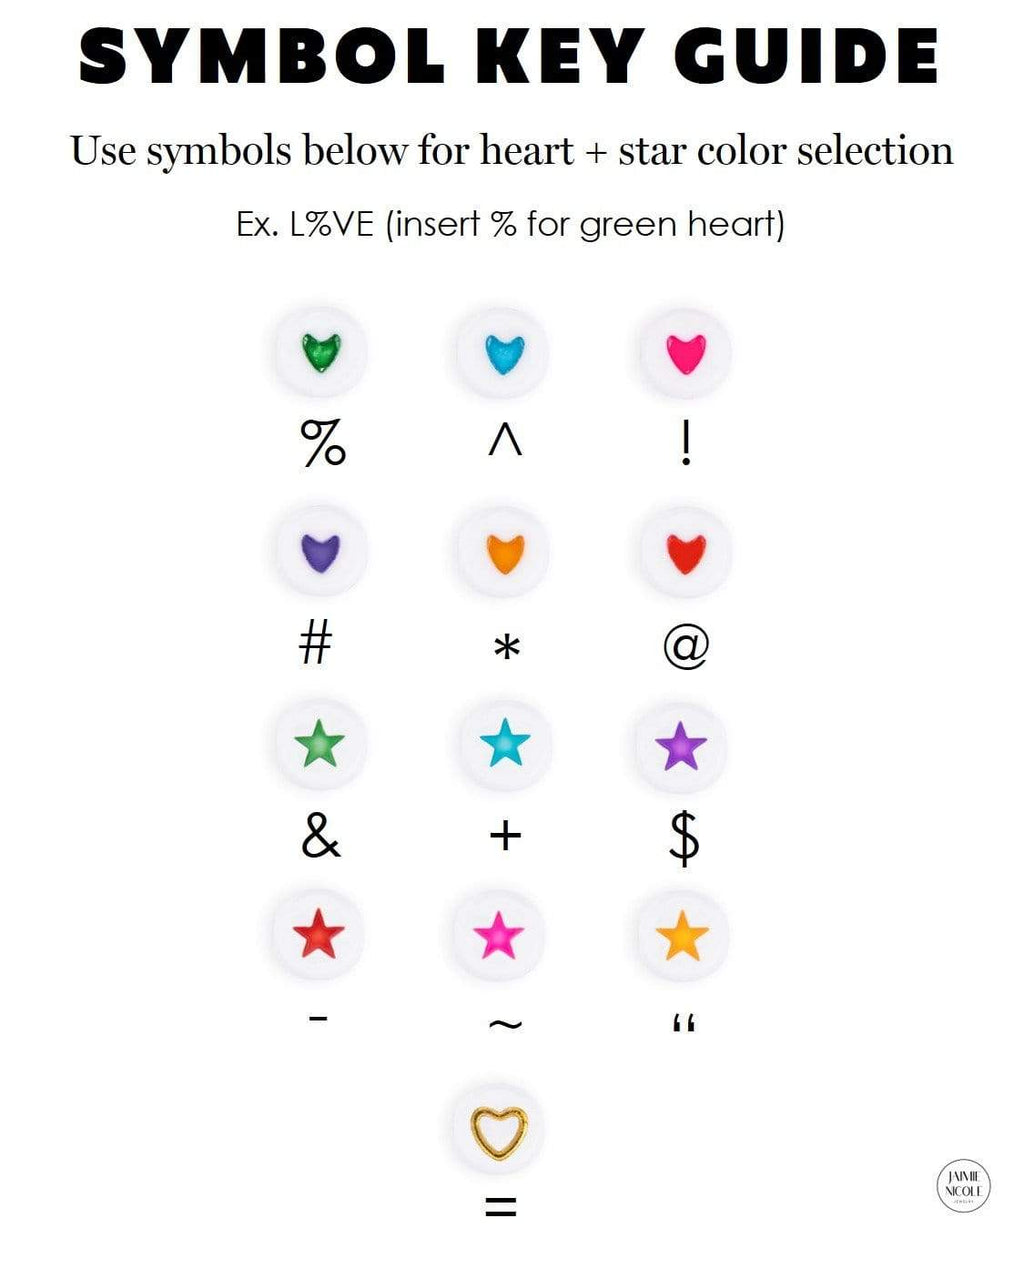 Load image into Gallery viewer, Spell It Out | Custom Initial Bracelets